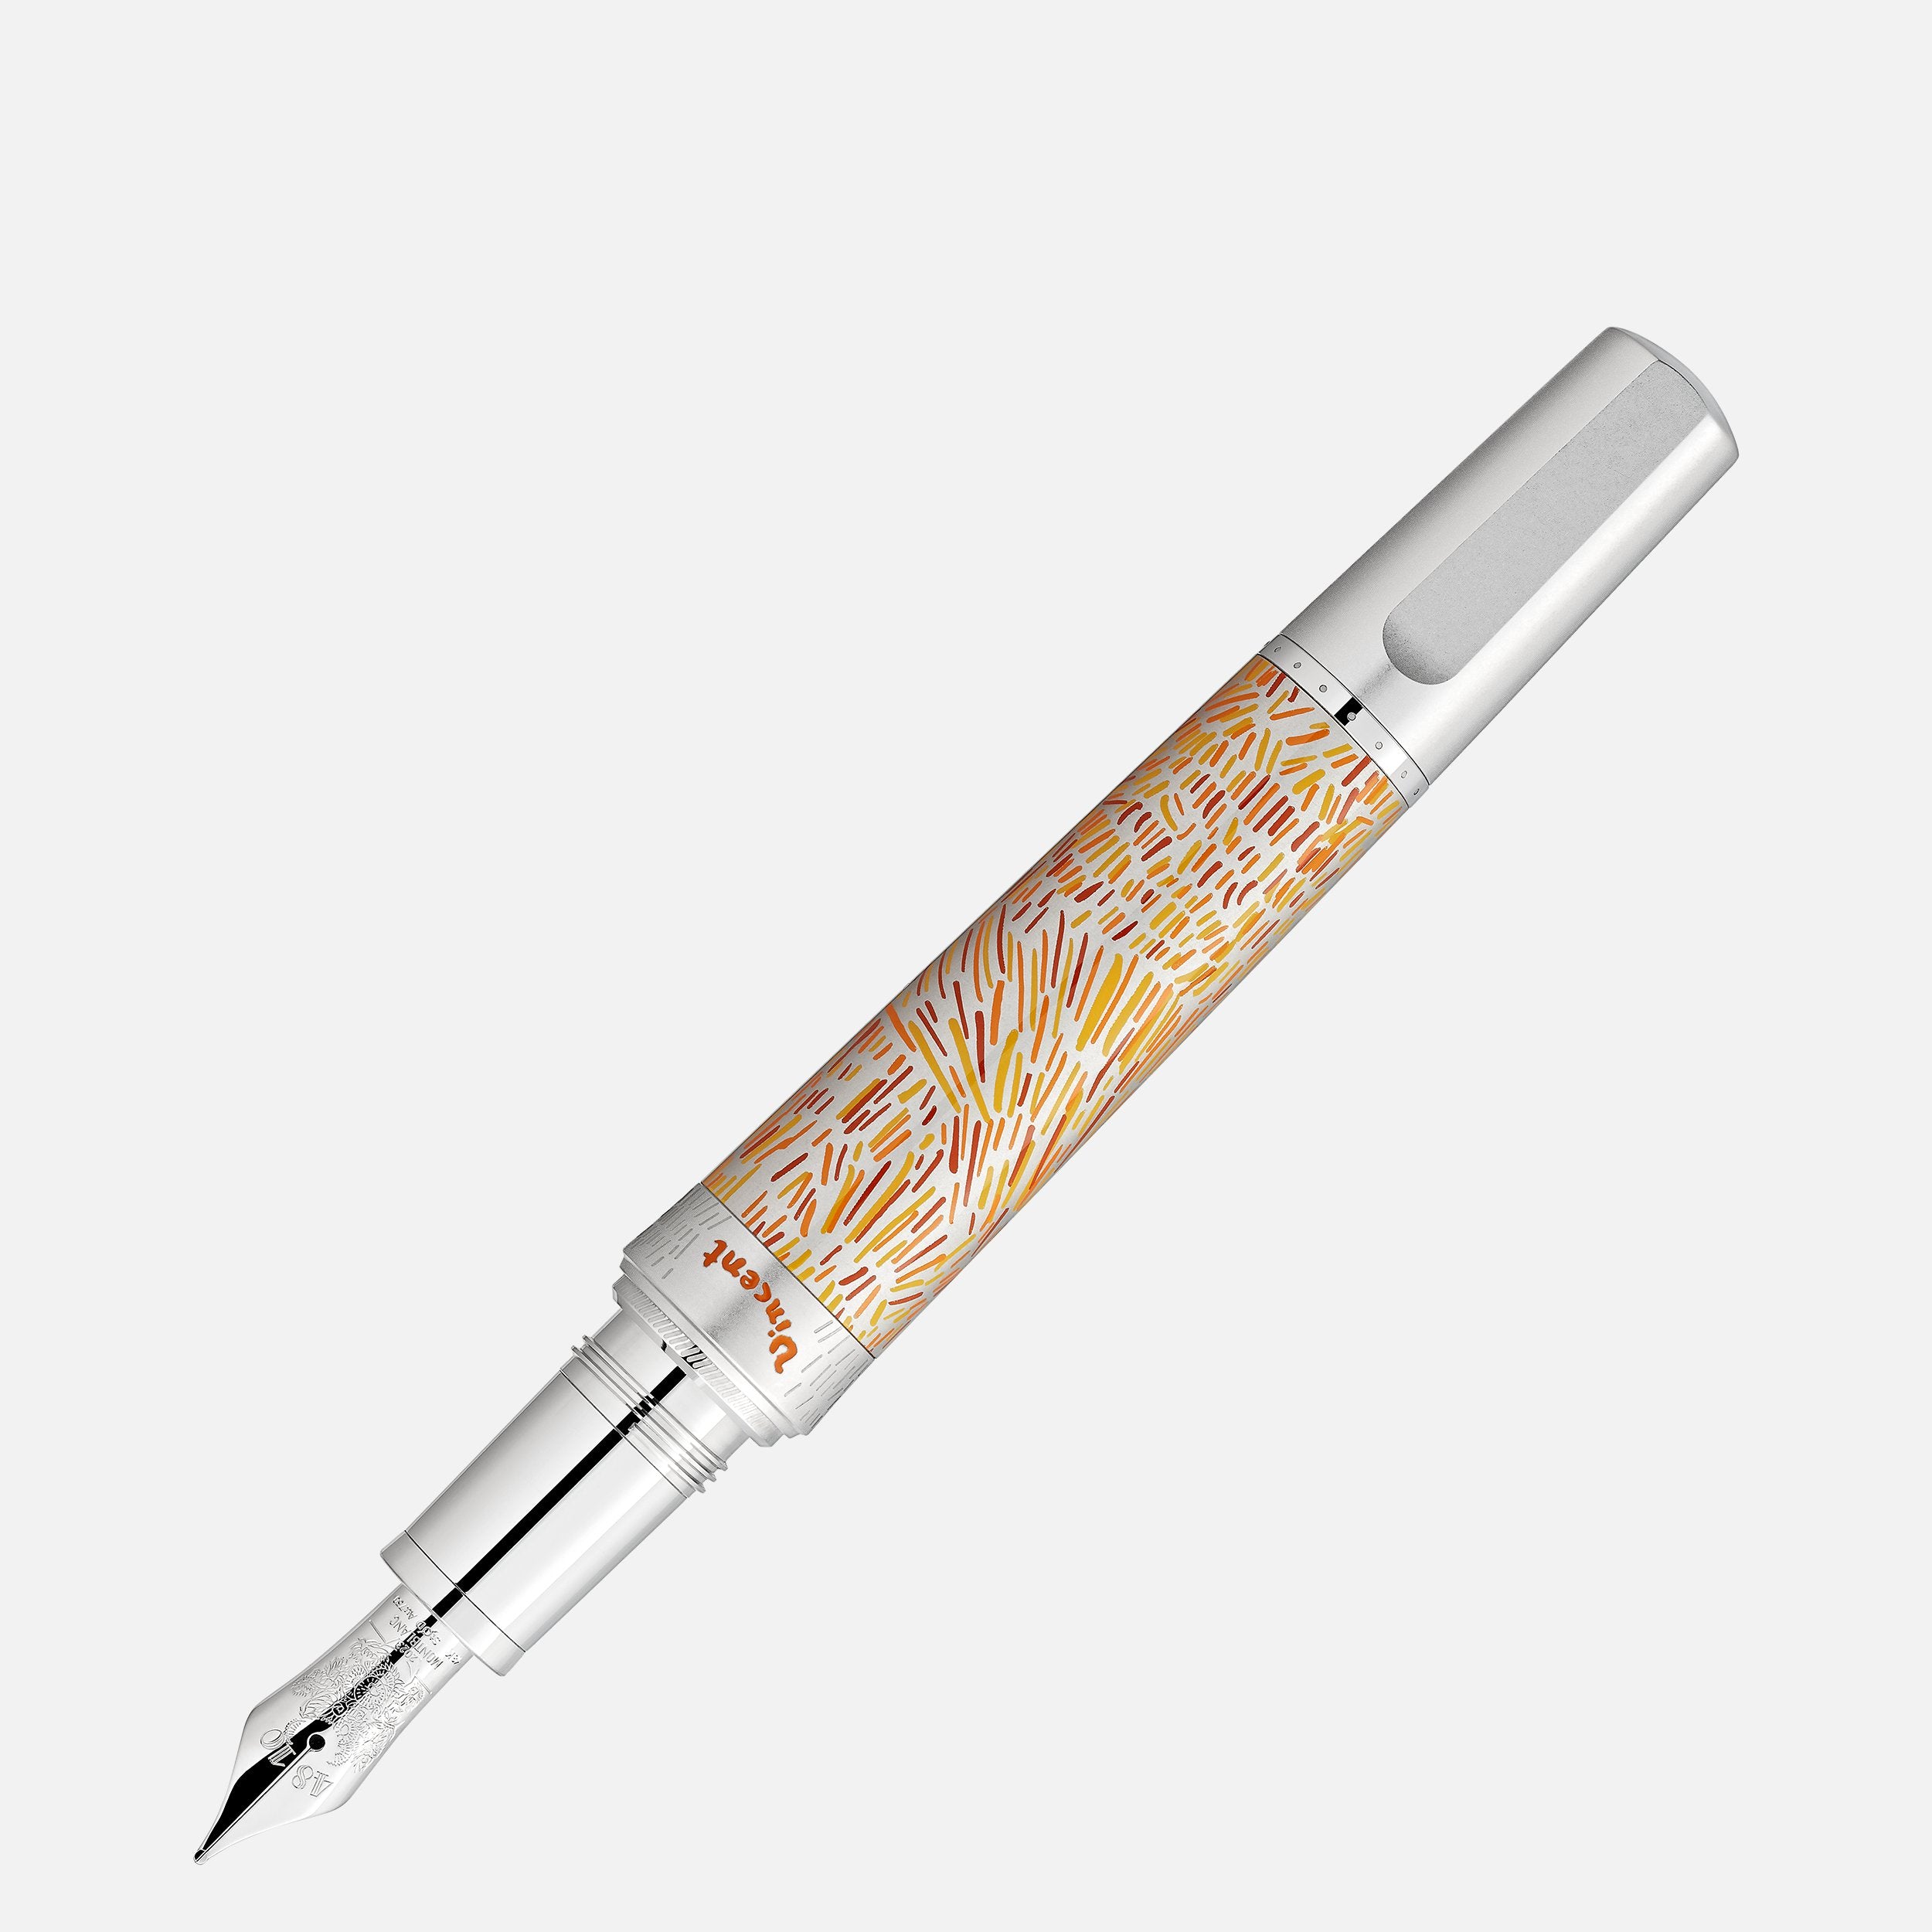 PRODUCT NAMEMASTERS OF ART HOMAGE TO VINCENT VAN GOGH LIMITED EDITION 4810 FOUNTAIN PEN F